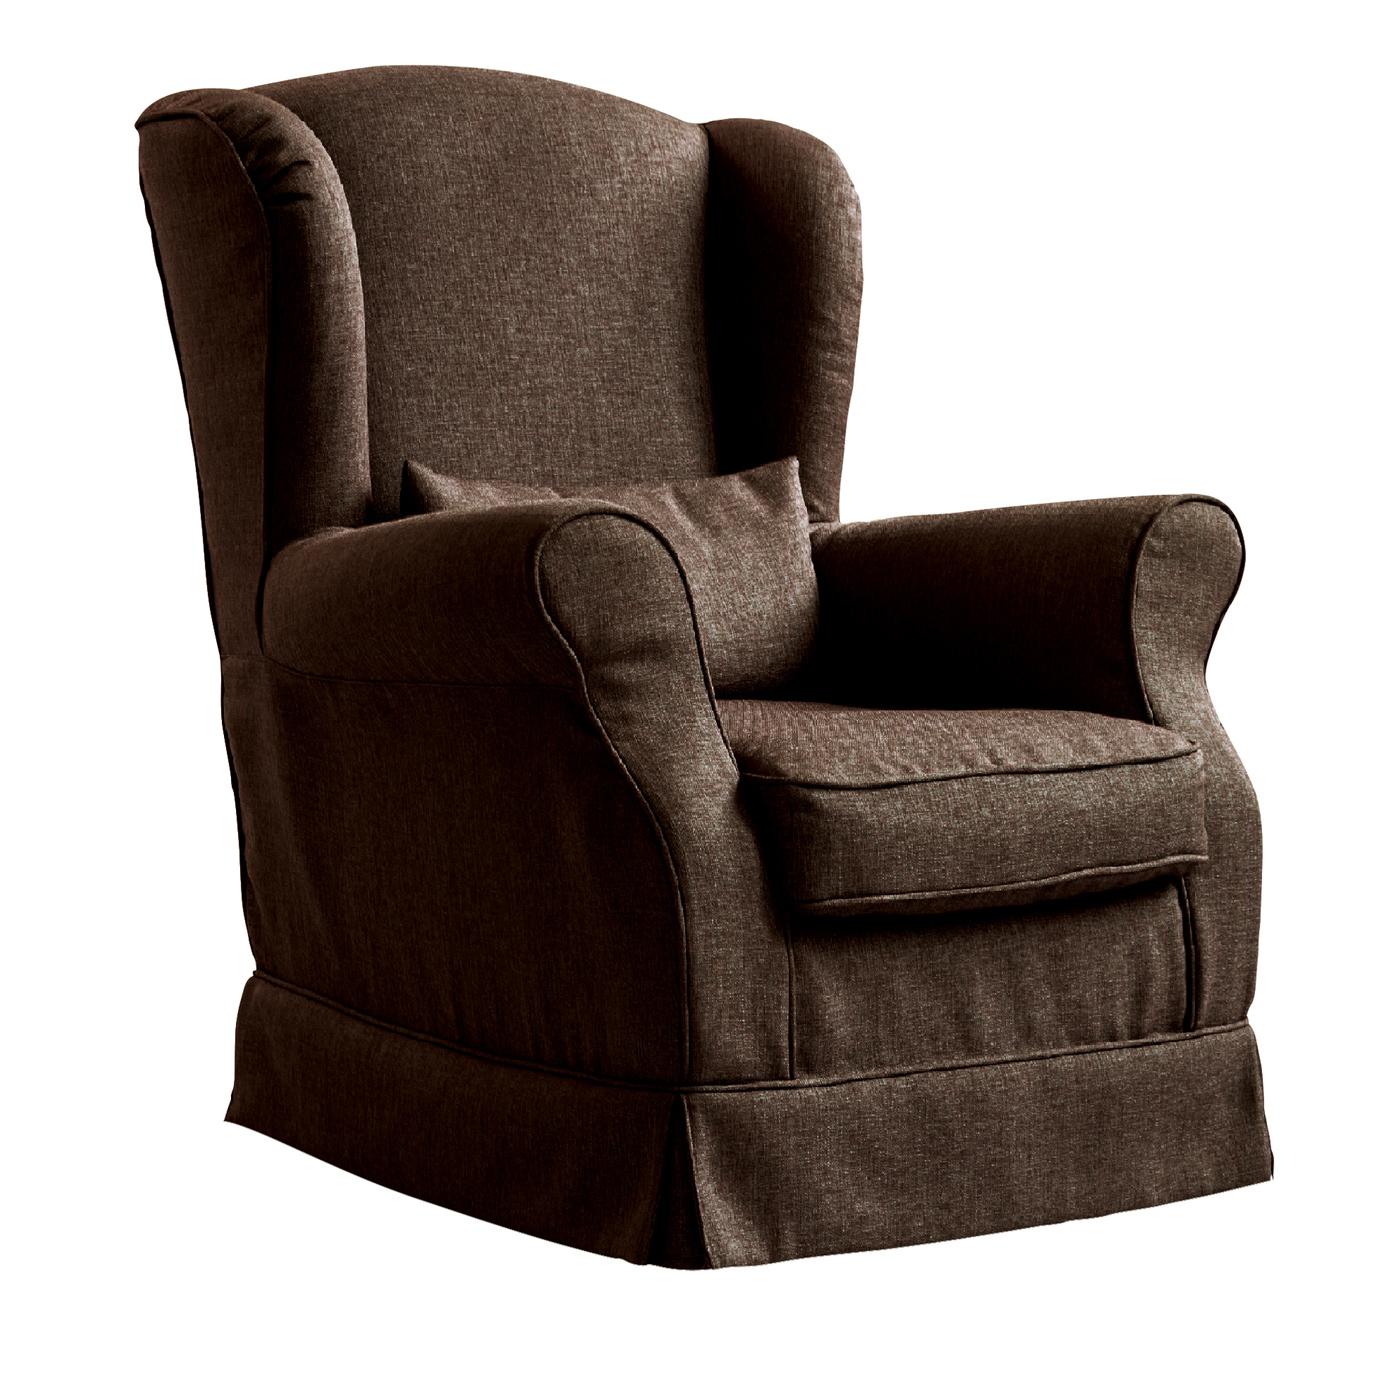 Contemporary armchair with flounce in uniform fabric in shades of brown. The straight back and the semi-rigid armrests guarantee a correct posture. The fully upholstered seat ensures comfort and freedom of movement. This piece of furniture perfectly